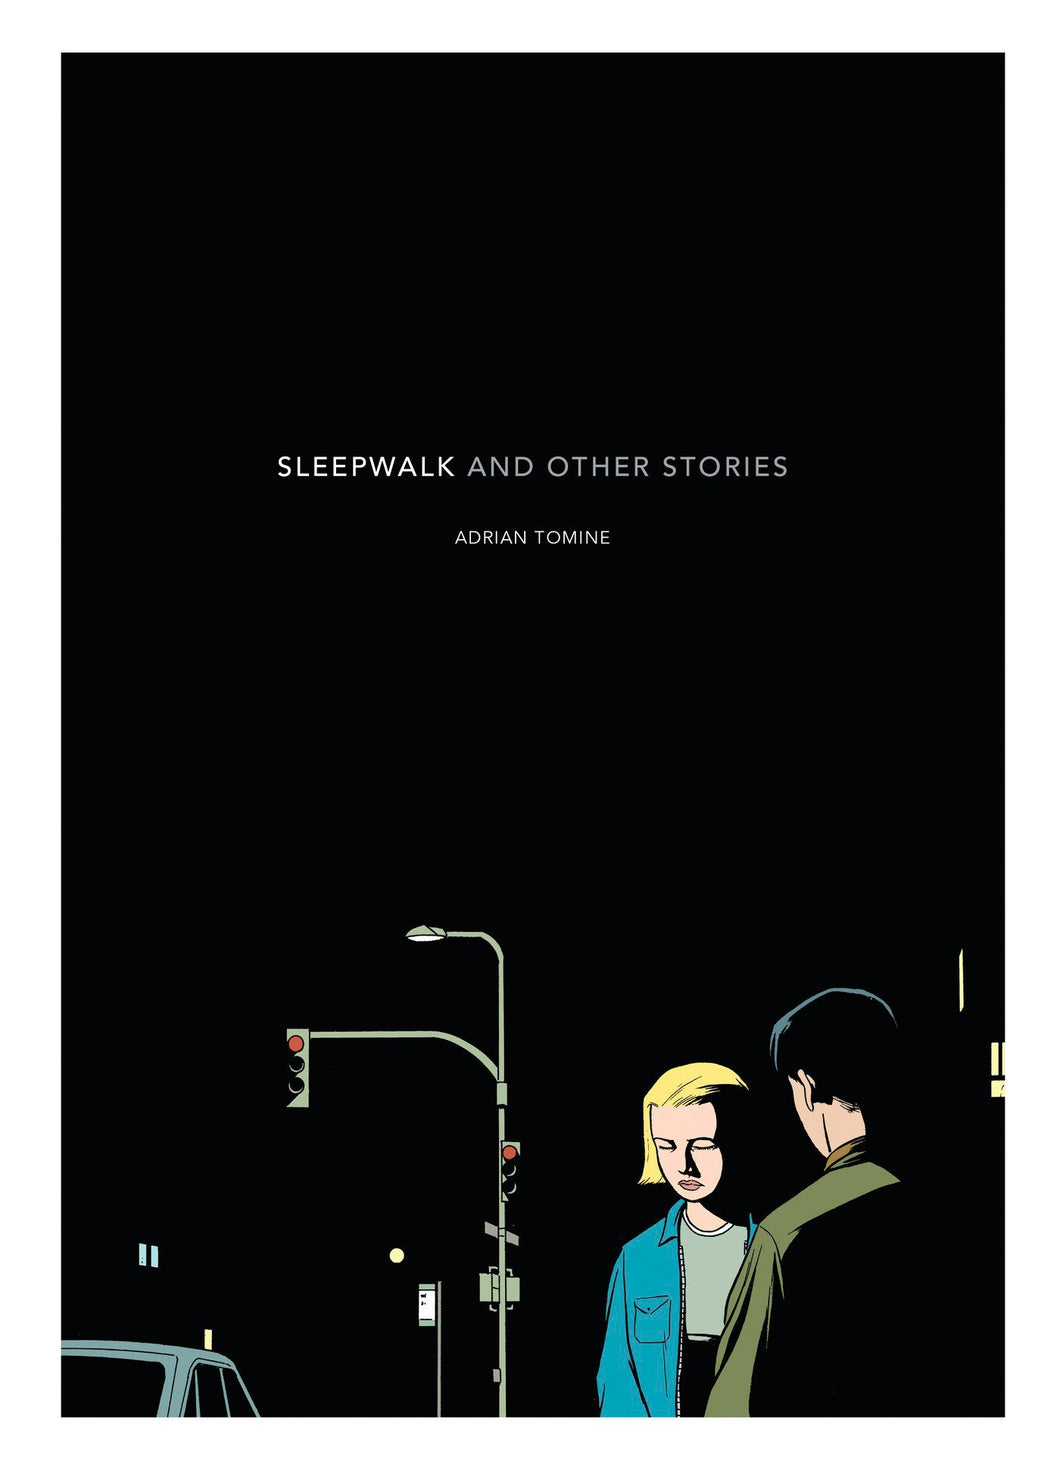 Sleepwalk: and Other Stories by Adrian Tomine